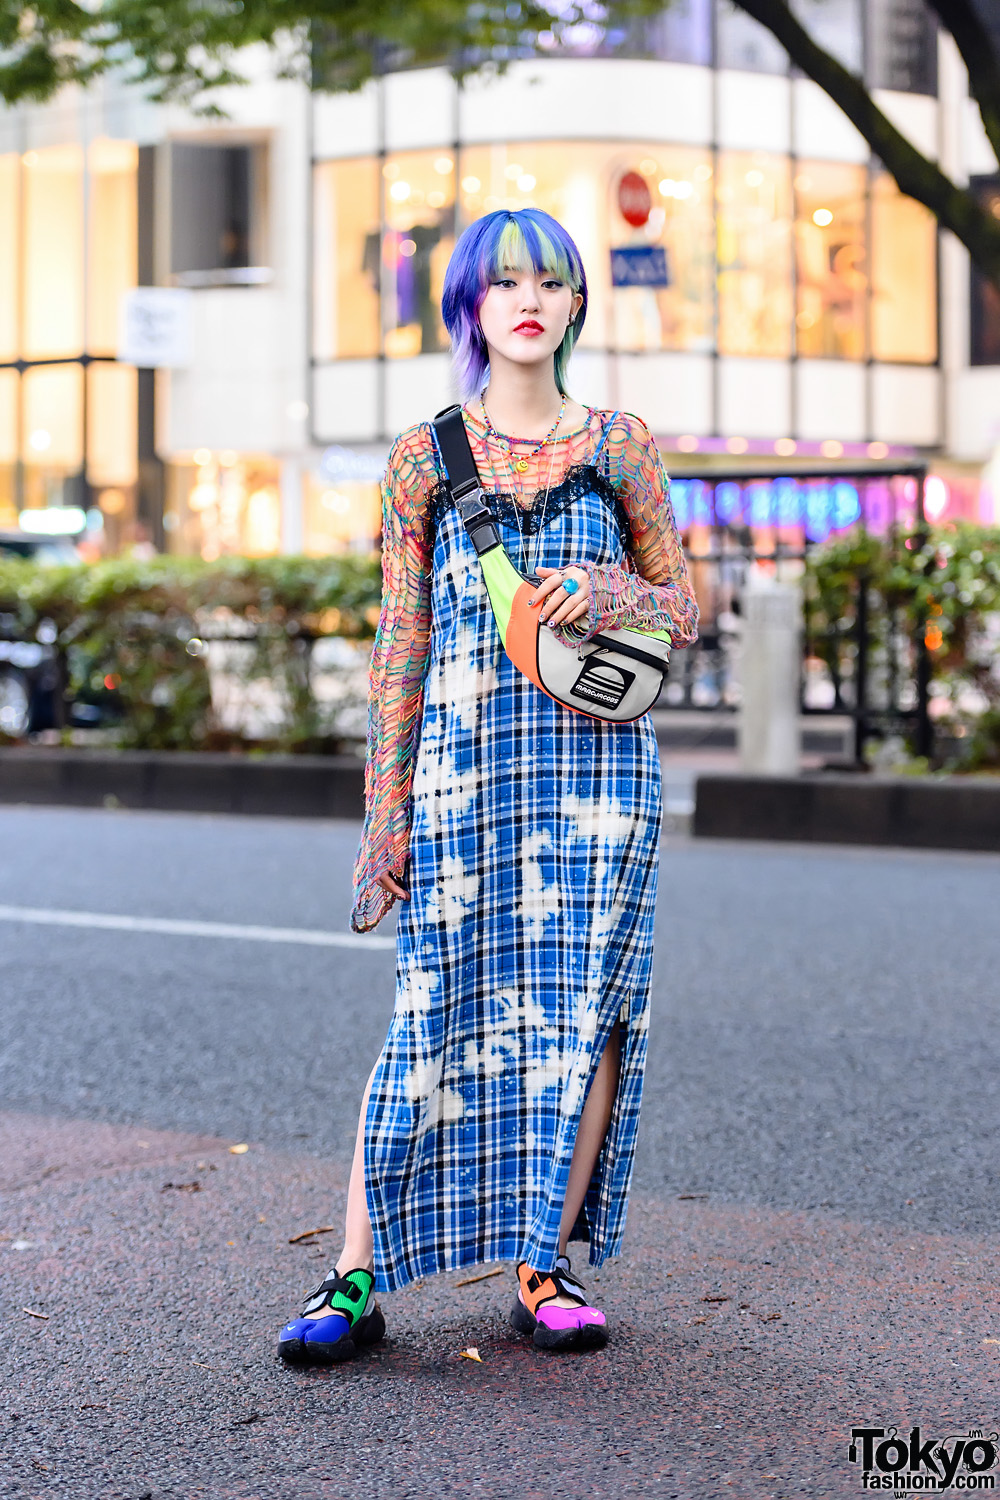 Colorful Tokyo Style w/ Multicolored Hair, Smiley Face Necklace, Knit Sweater, X-Girl Plaid Dres, Marc Jacobs & Nike Tabi Sneakers